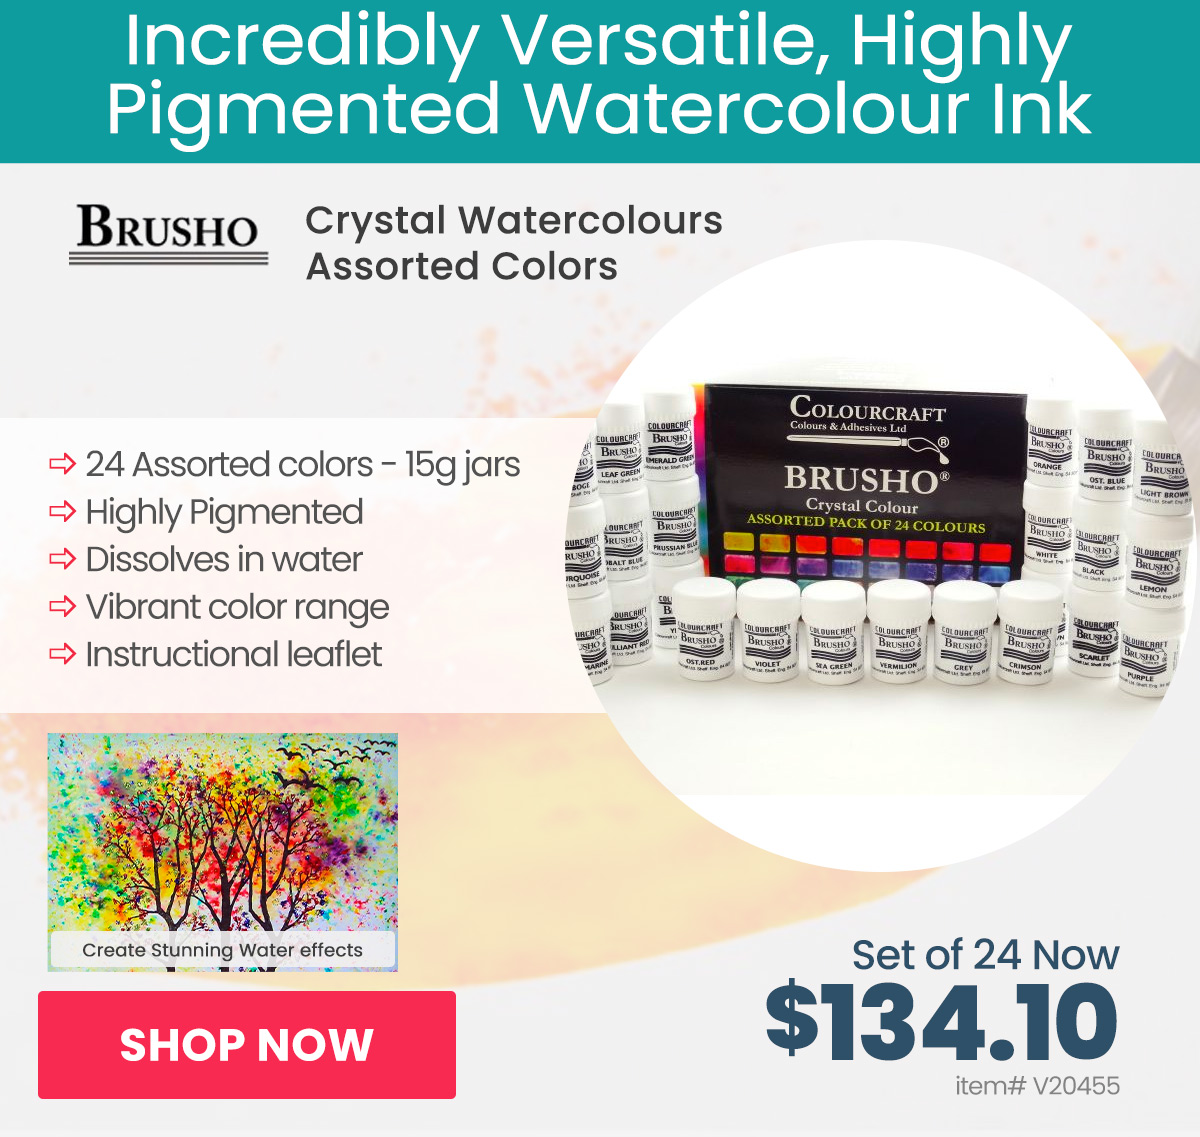 Brusho Crystal Watercolours Assorted Colors 15 grams Set of 24